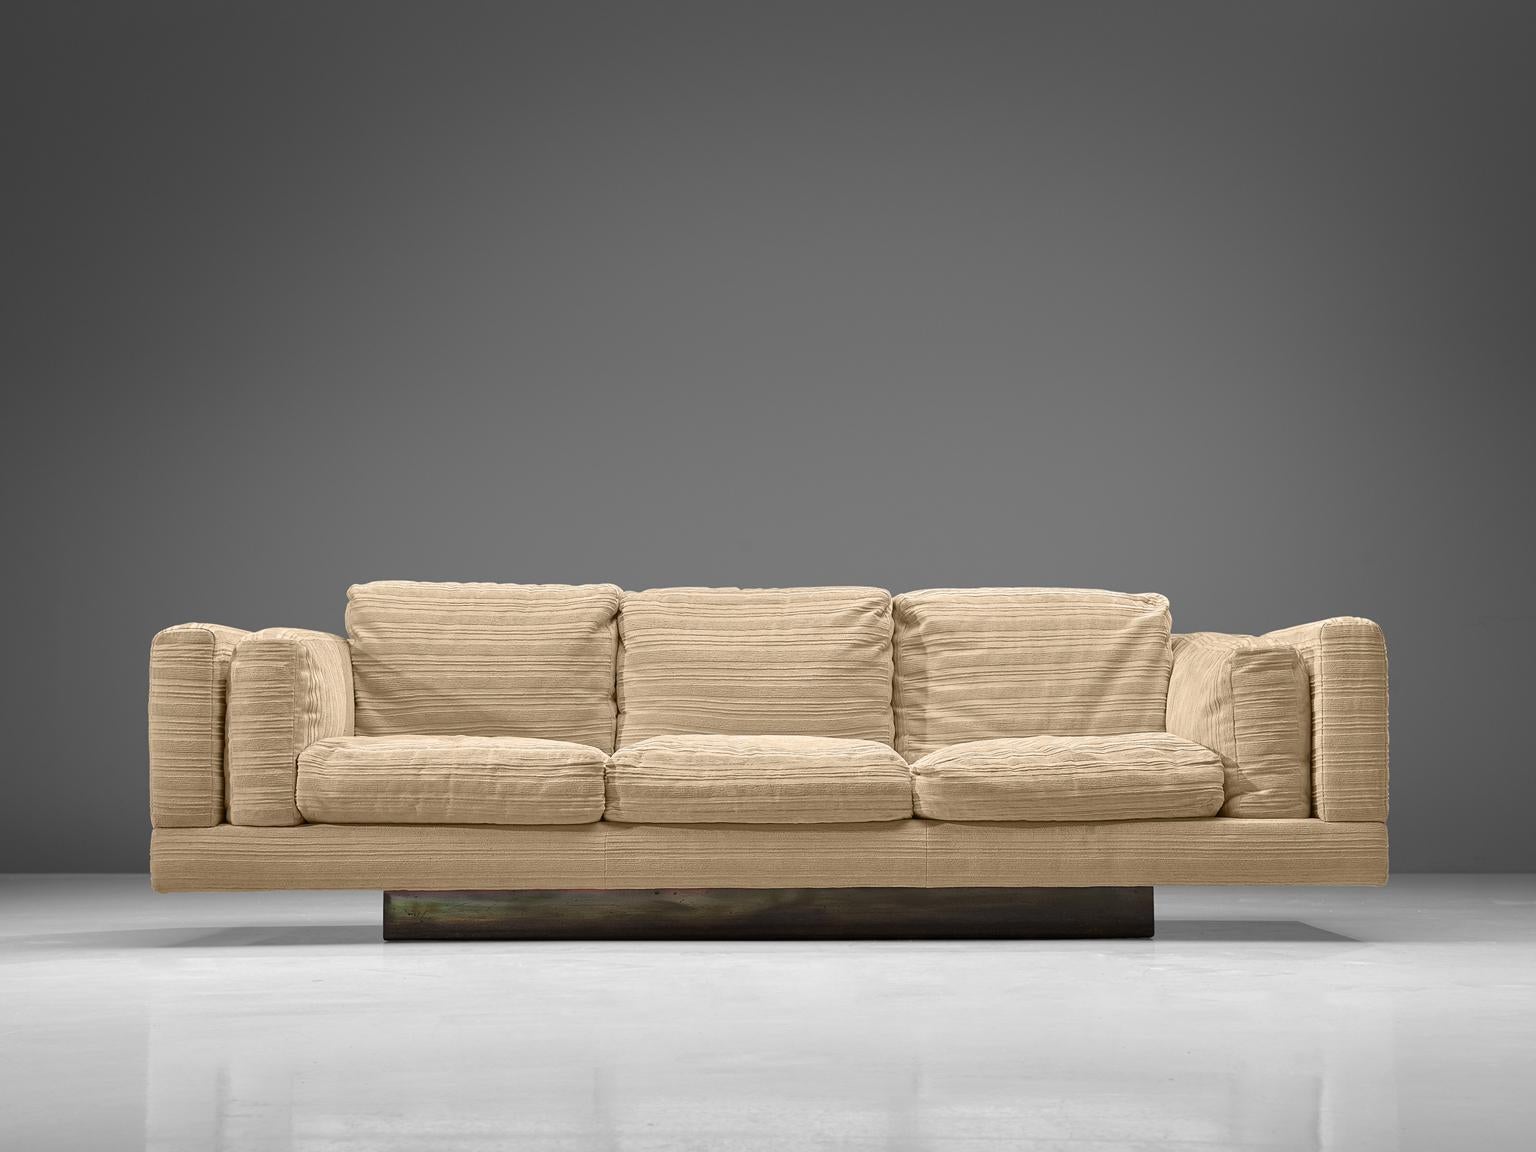 Milo Baughman for Thayer Coggin, three seat sofa, fabric and metal, United States, 1970s. 

This grand three-seat sofa by Milo Baughman is designed in a modest, yet distinguished look. A comfortable sofa has thick cushions for the seat, which a